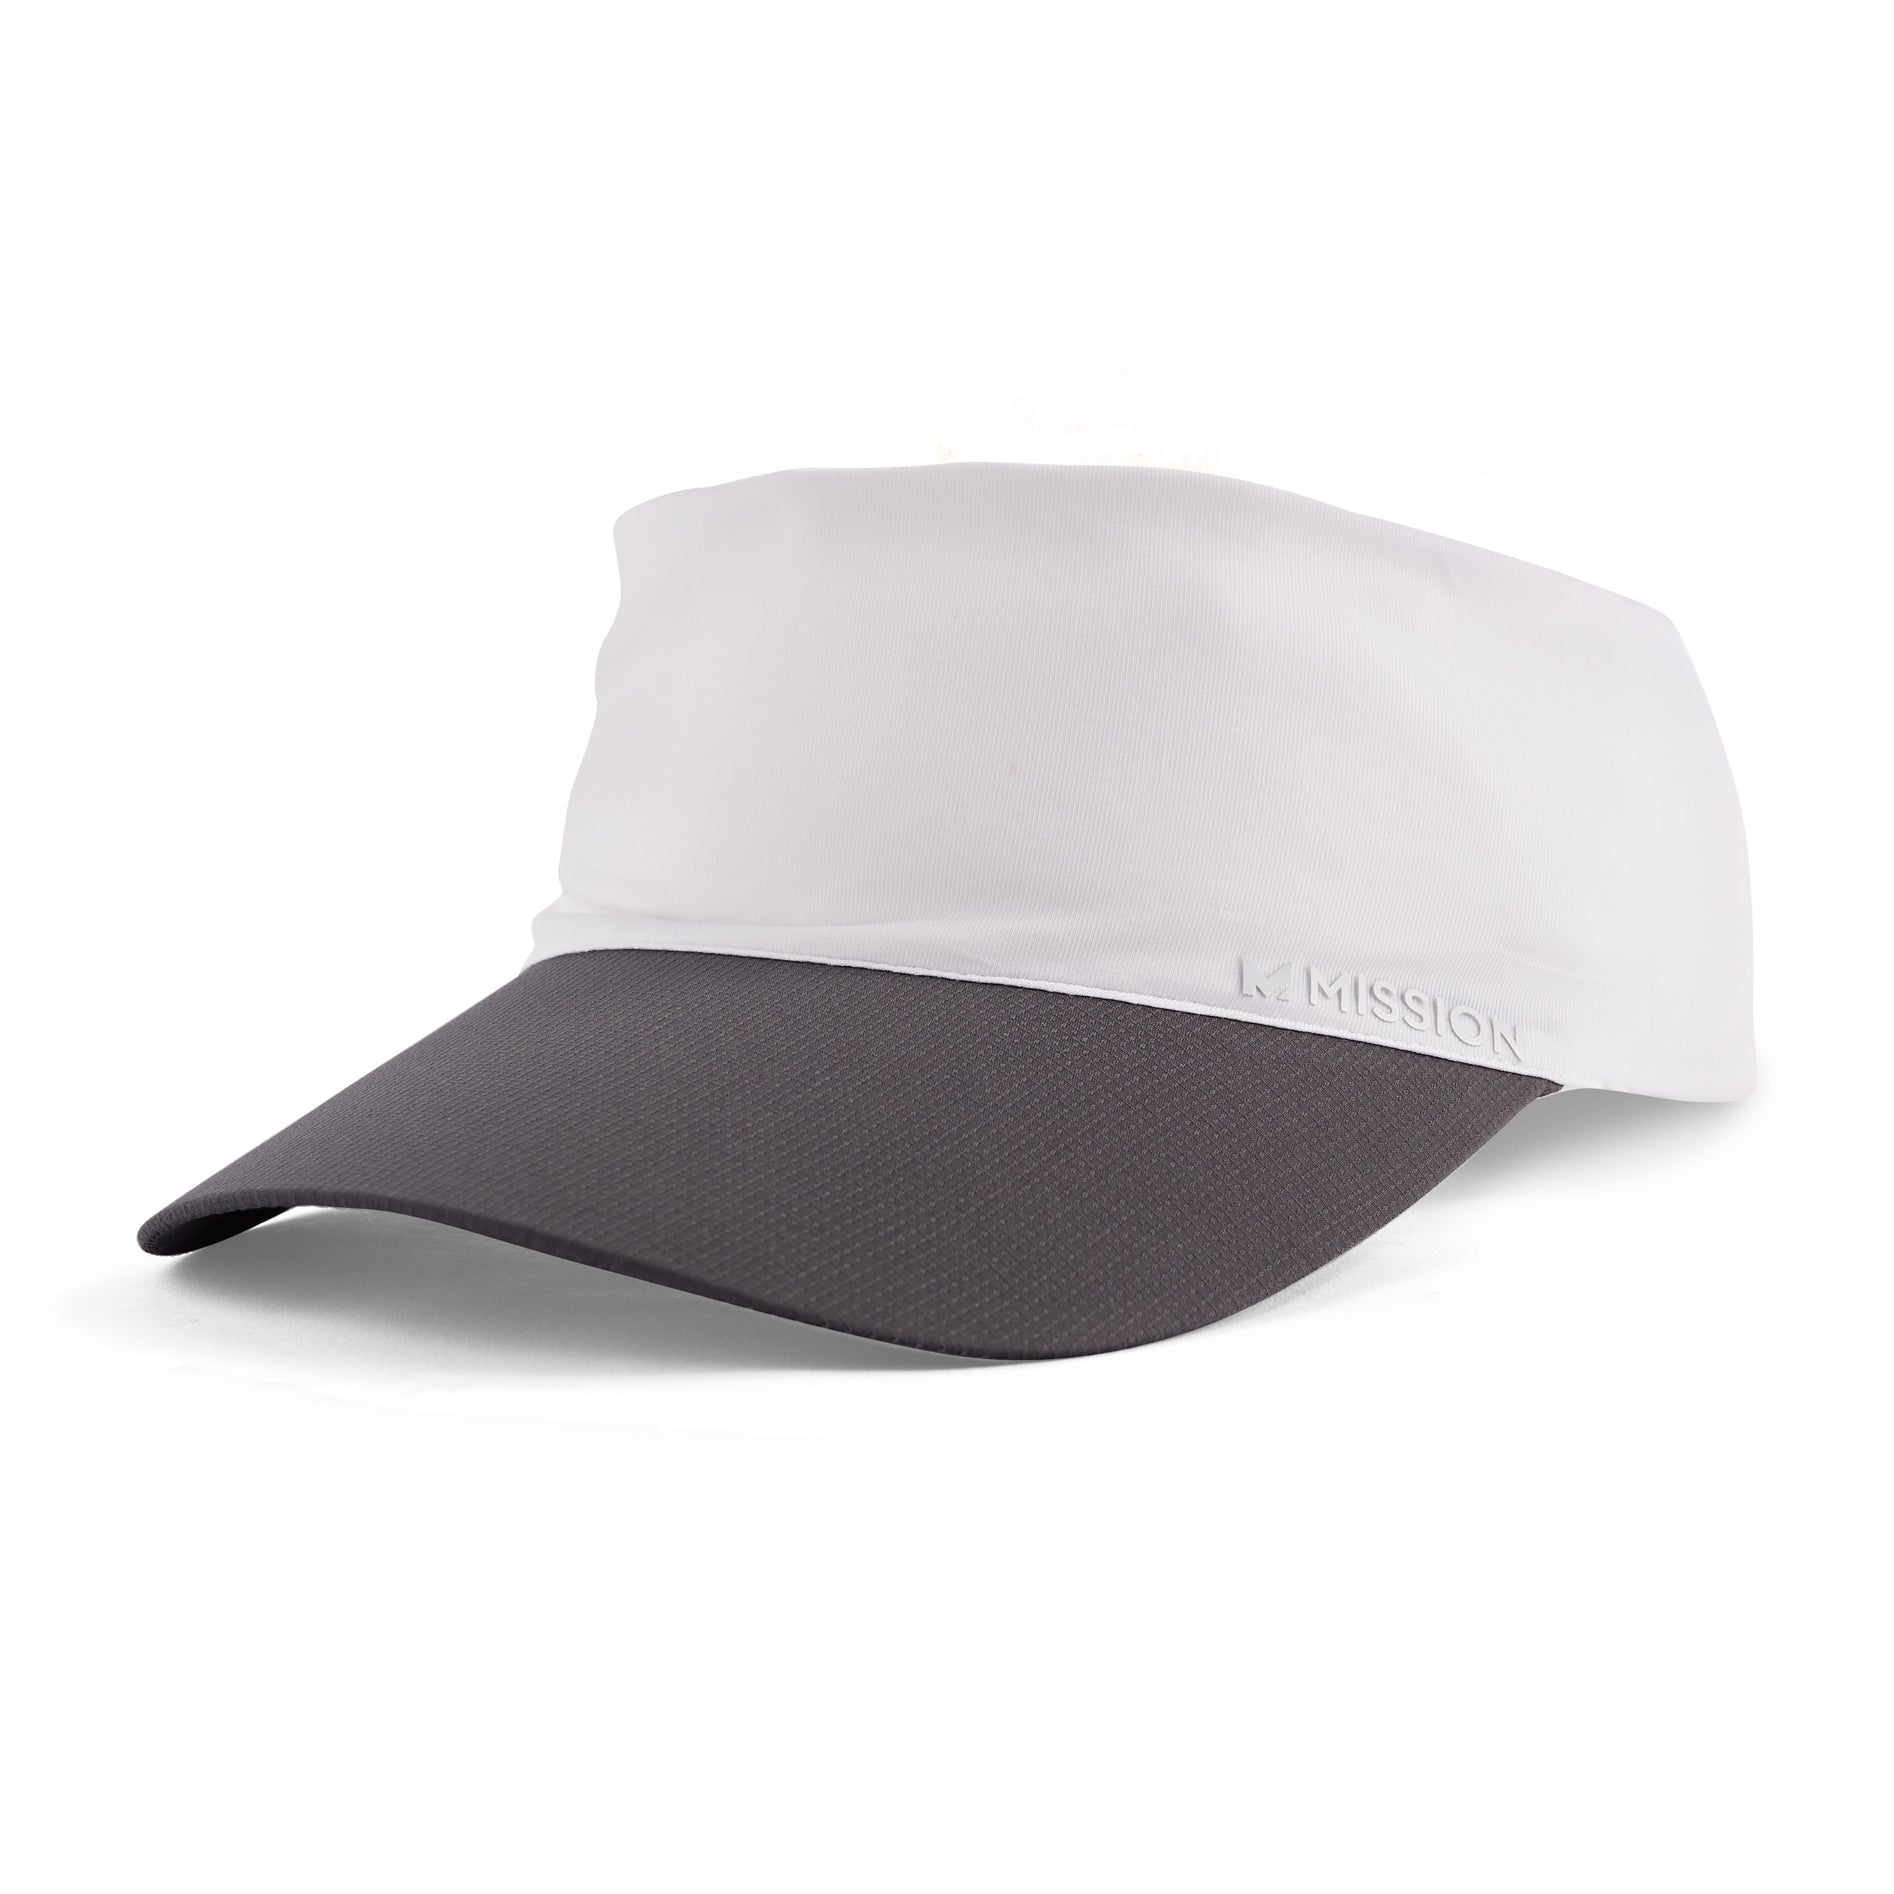 Cooling Visor Caps MISSION One Size Bright White 